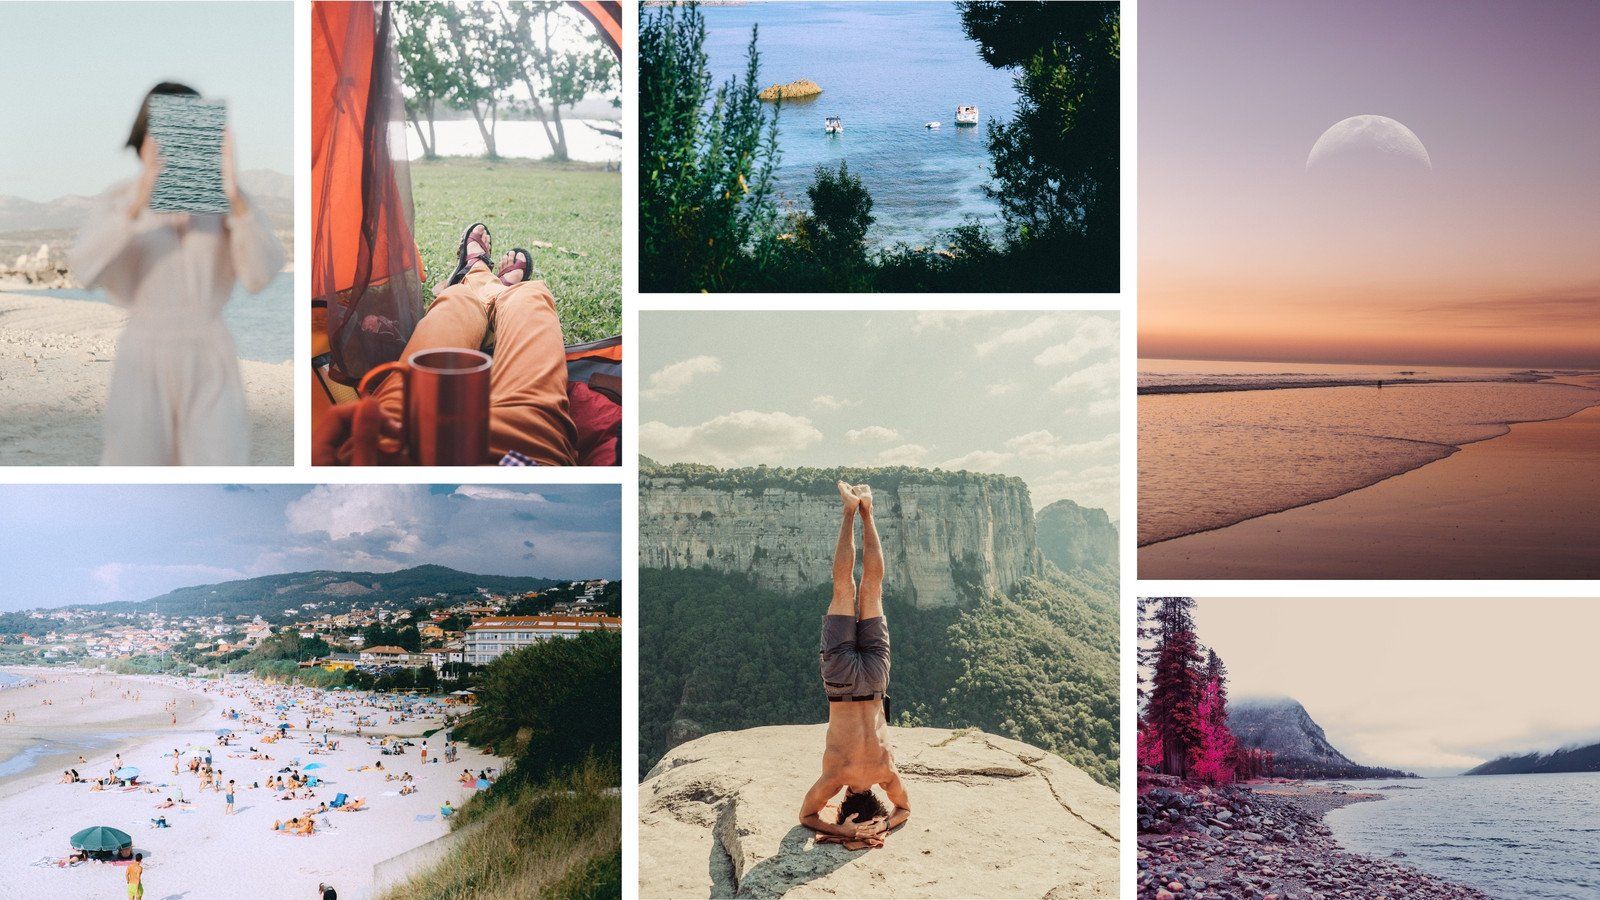 A collage of images including a beach, a person doing yoga, a sunset, a person with a book, a beach at night and a beach with a person doing a handstand - Travel